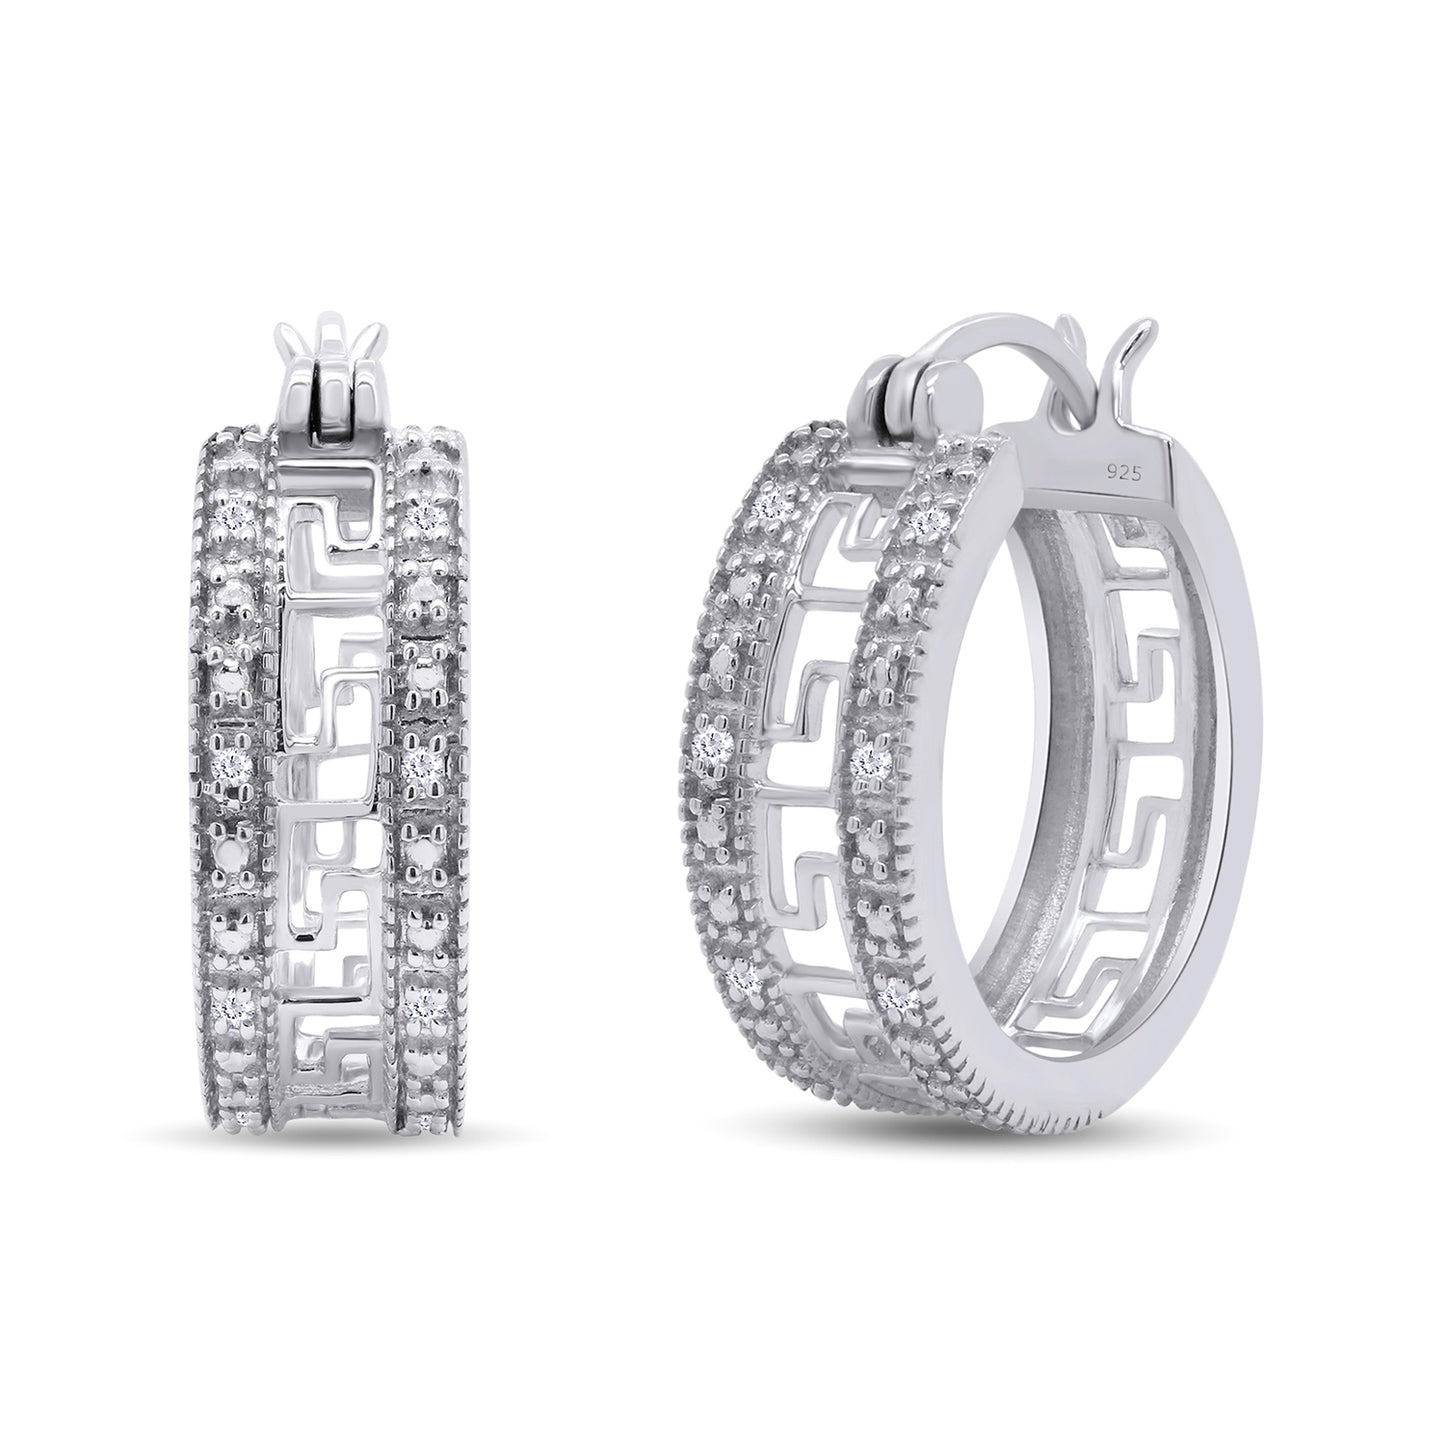 Round Cut White Natural Diamond Hoop Earrings For Women In 925 Sterling Silver